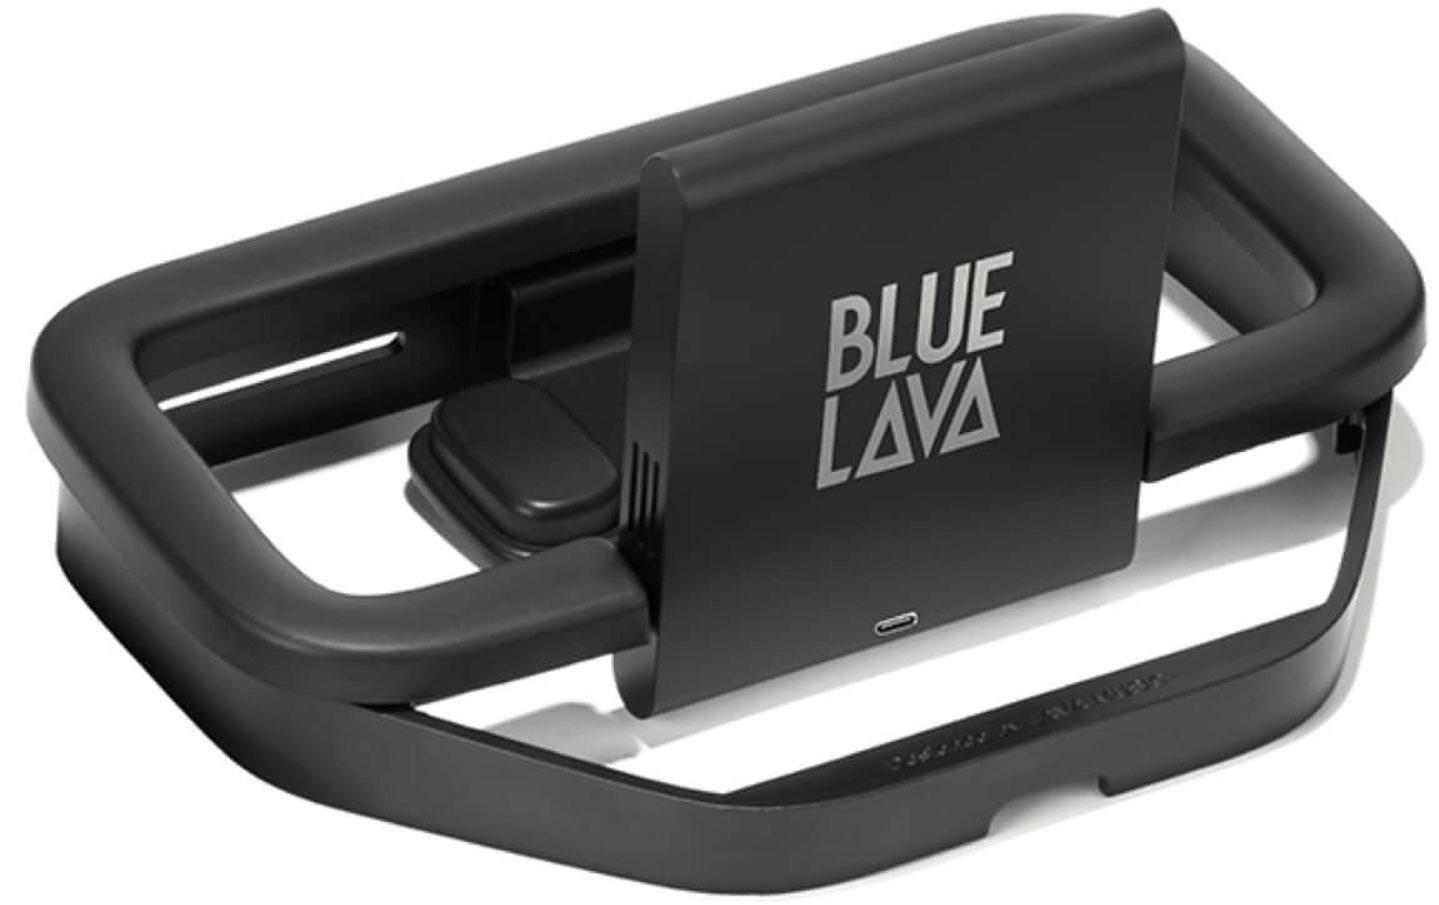 Battery Lava music AirFlow Wireless Charger Guitar Stand